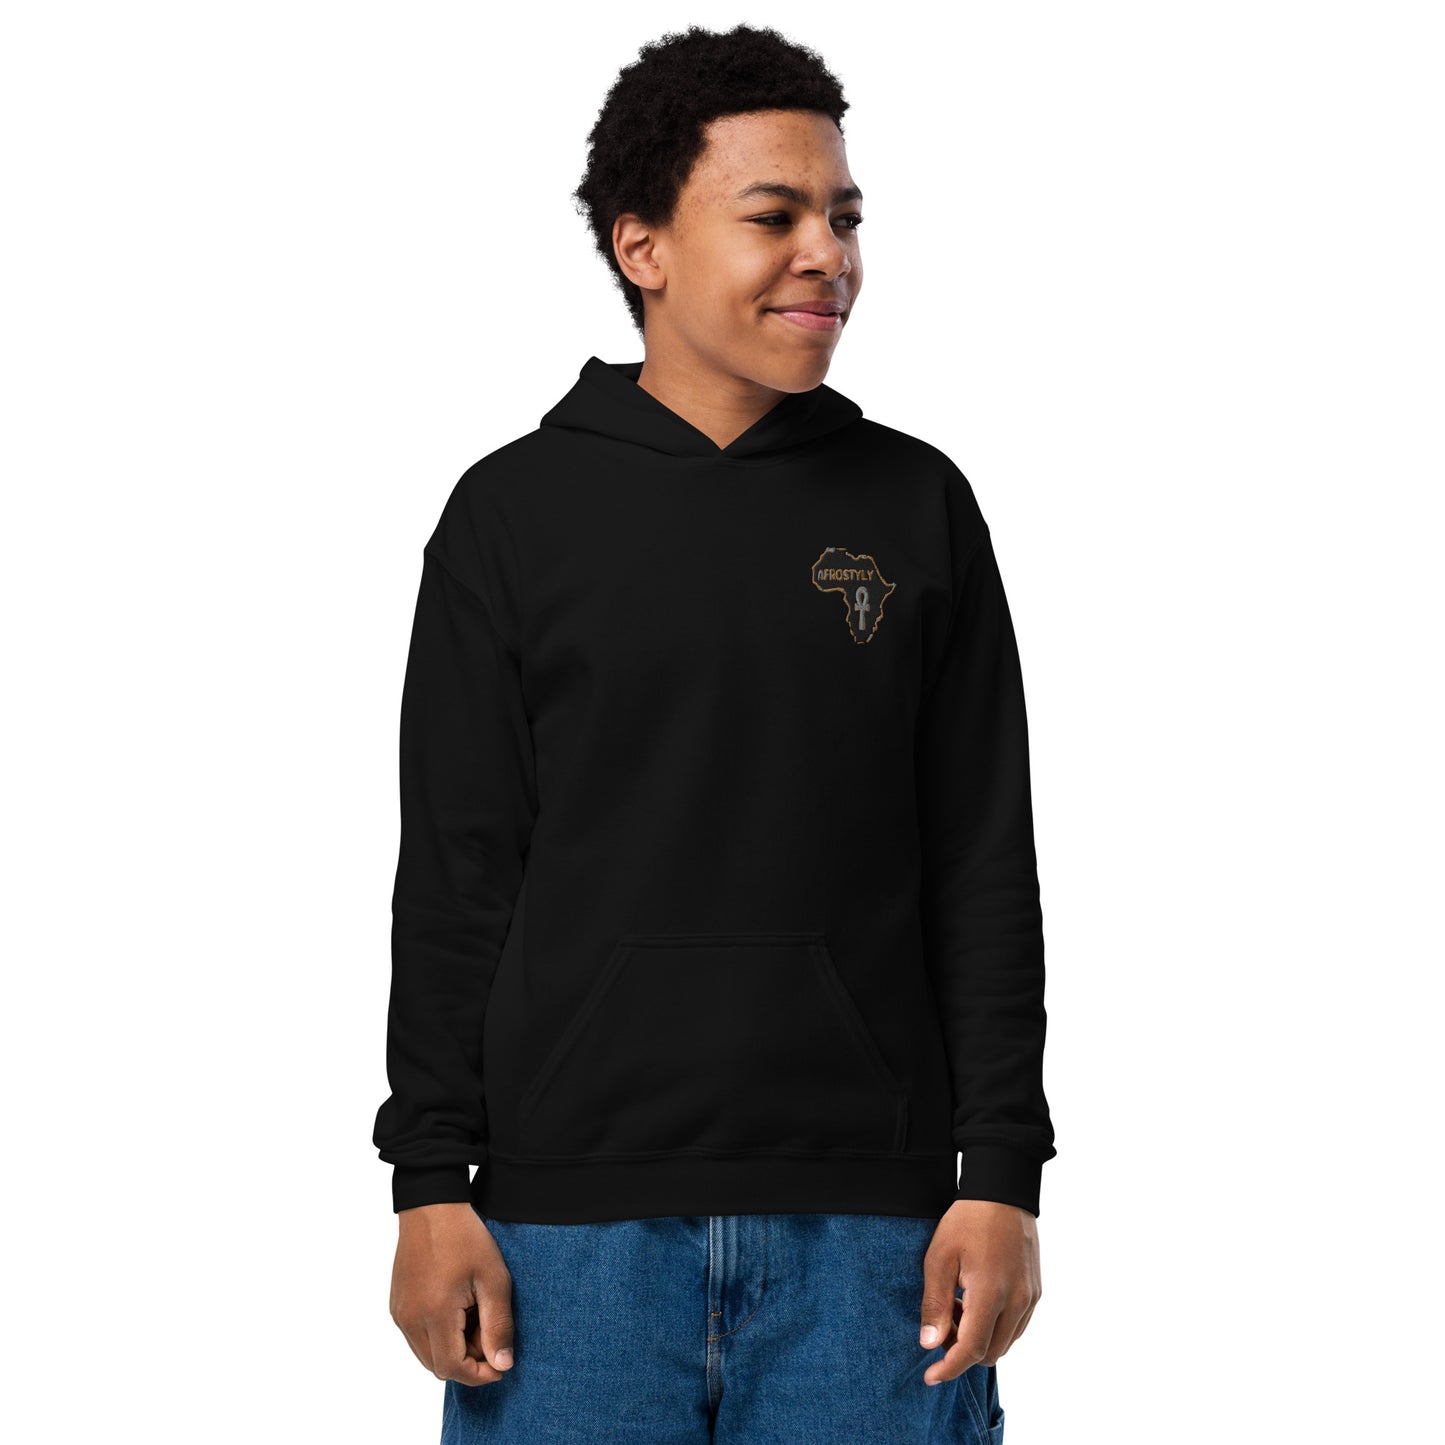 AFROSTYLY Youth heavy blend hoodie